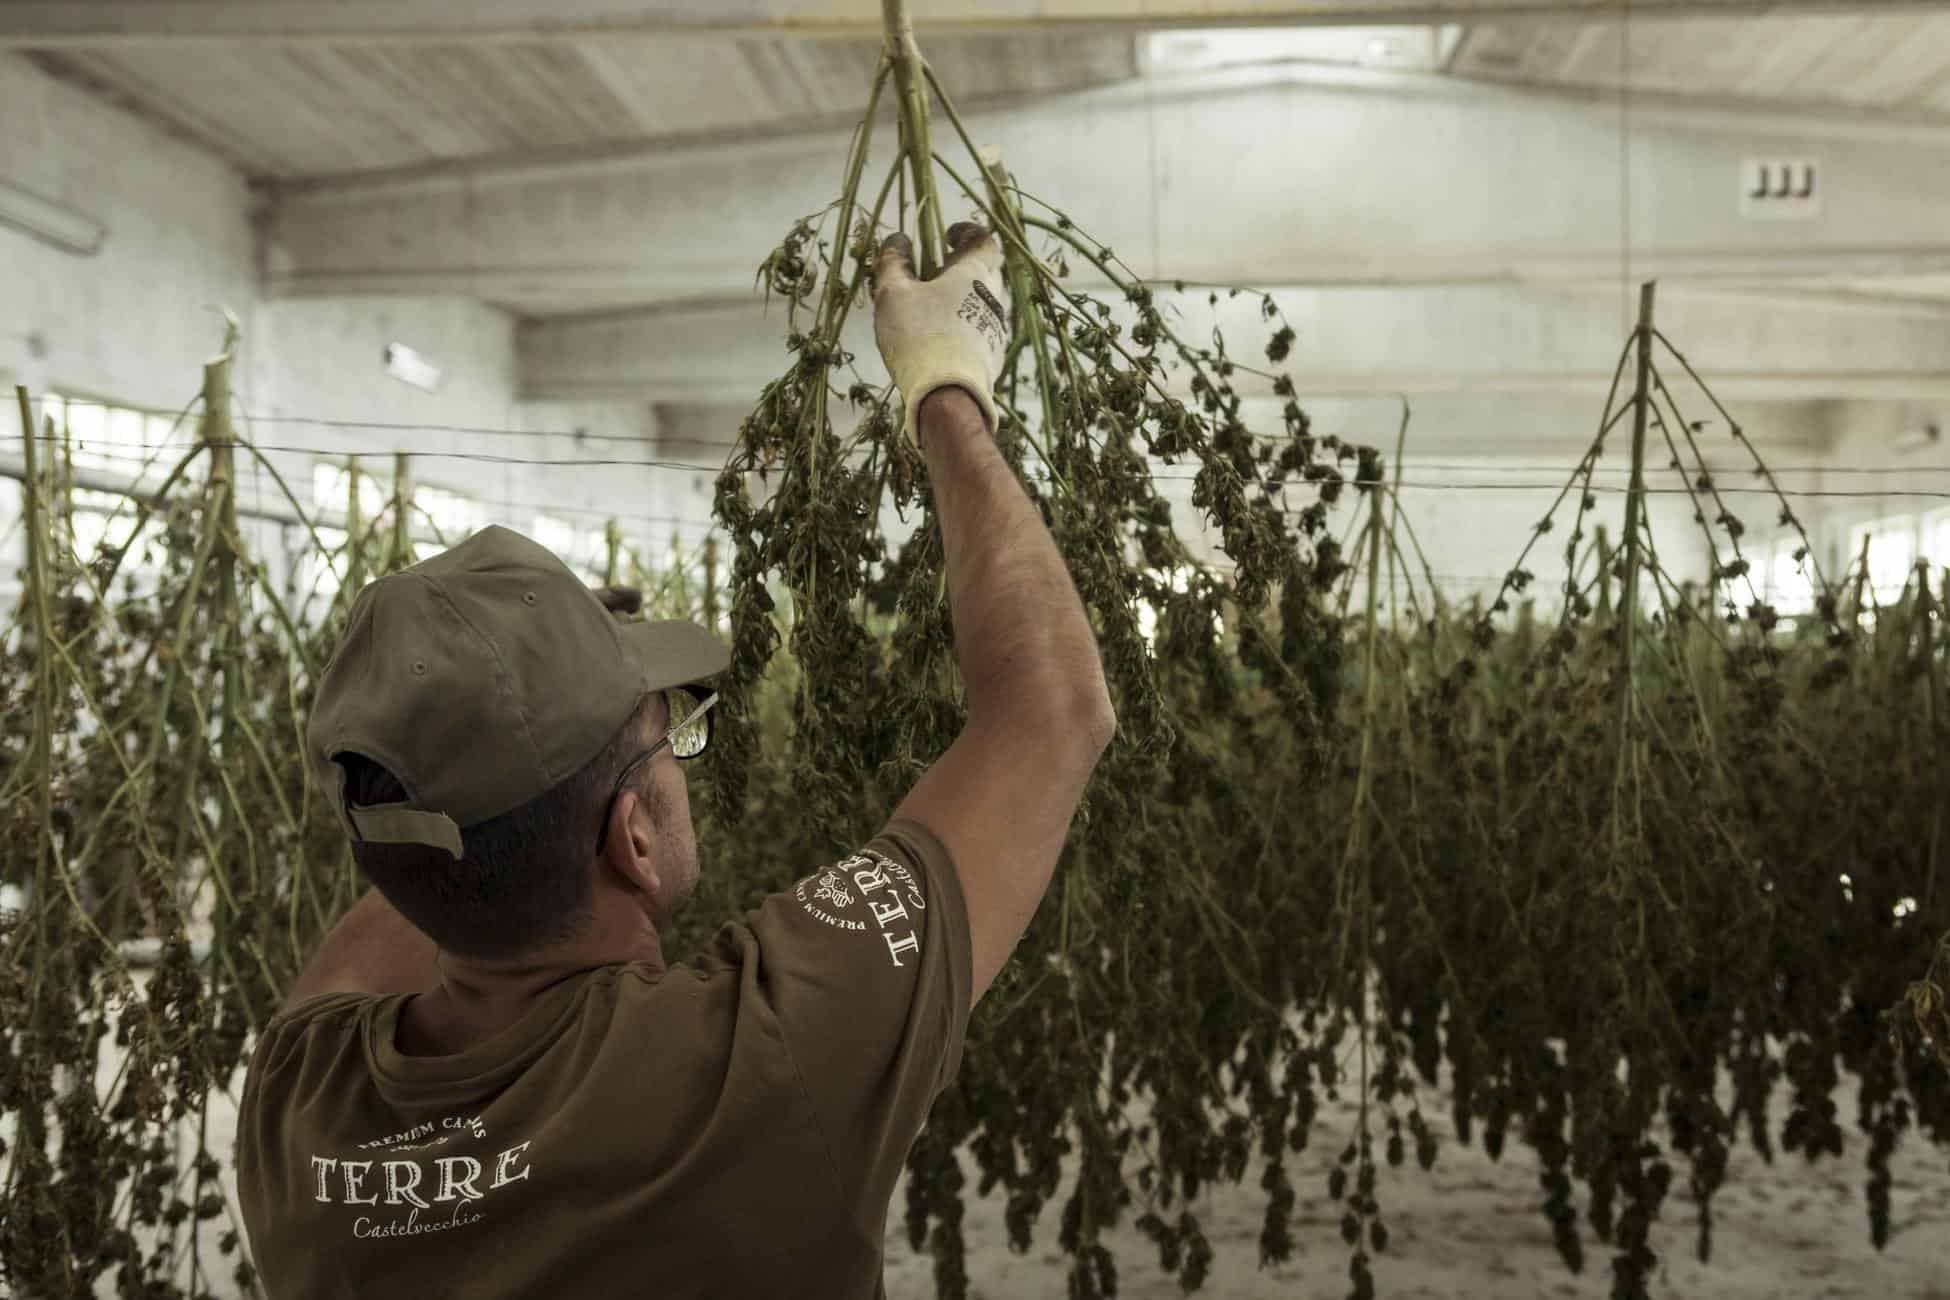 The Most Coveted Marijuana Jobs By City